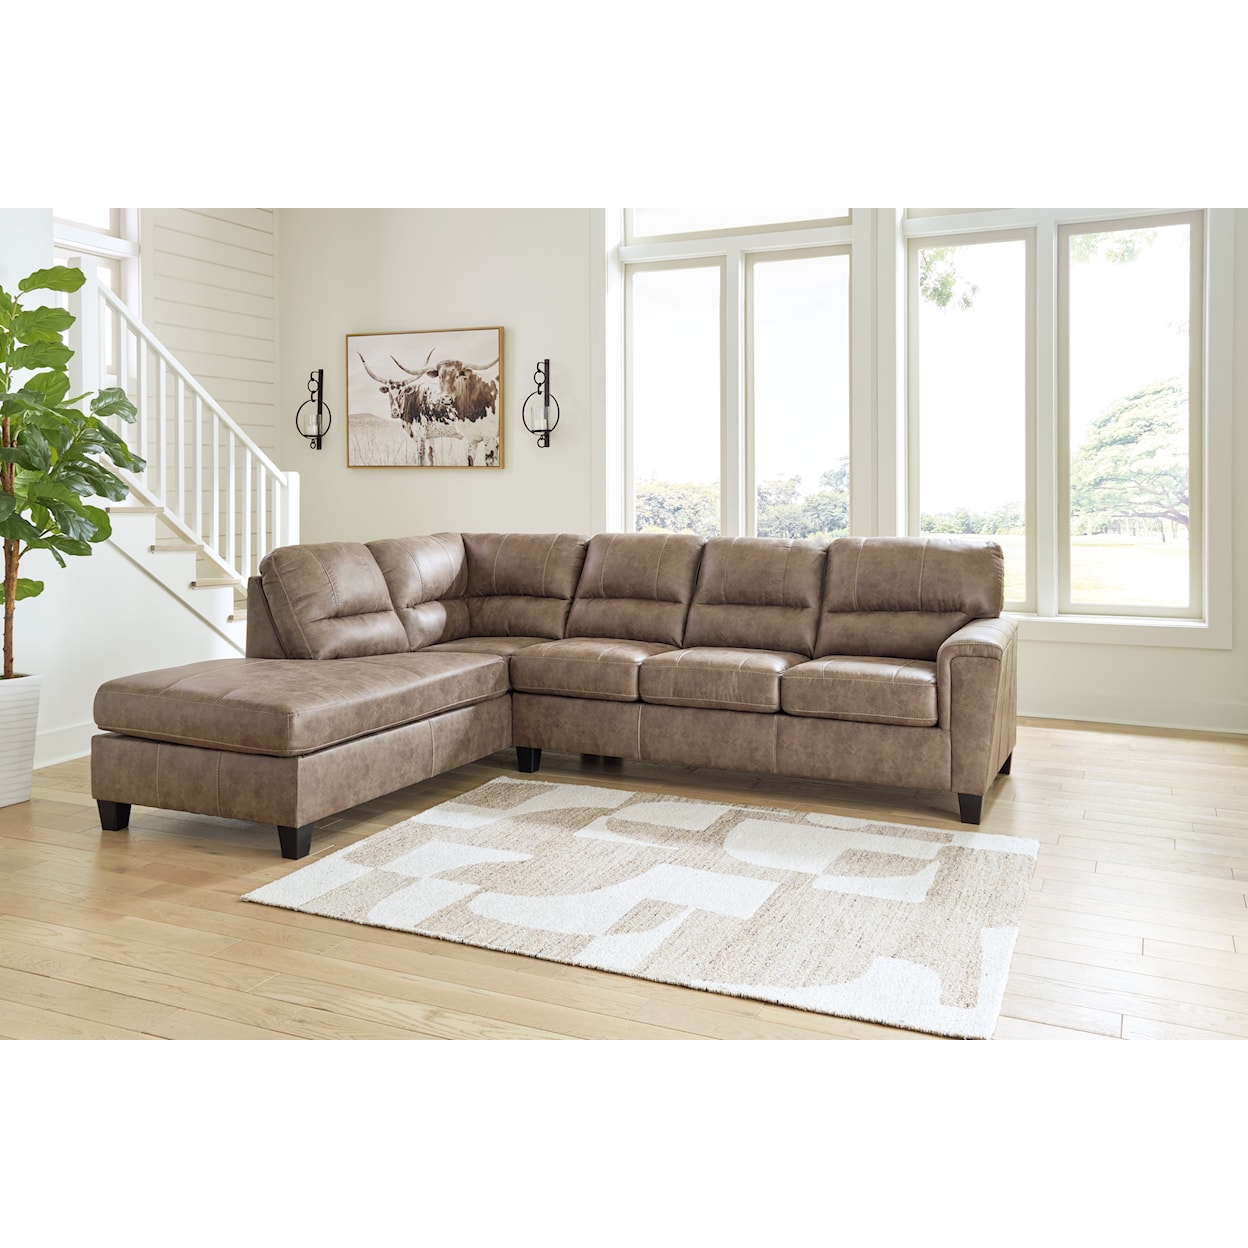 Ashley Furniture Signature Design Navi 2-Piece Sectional w/ Sleeper and Chaise